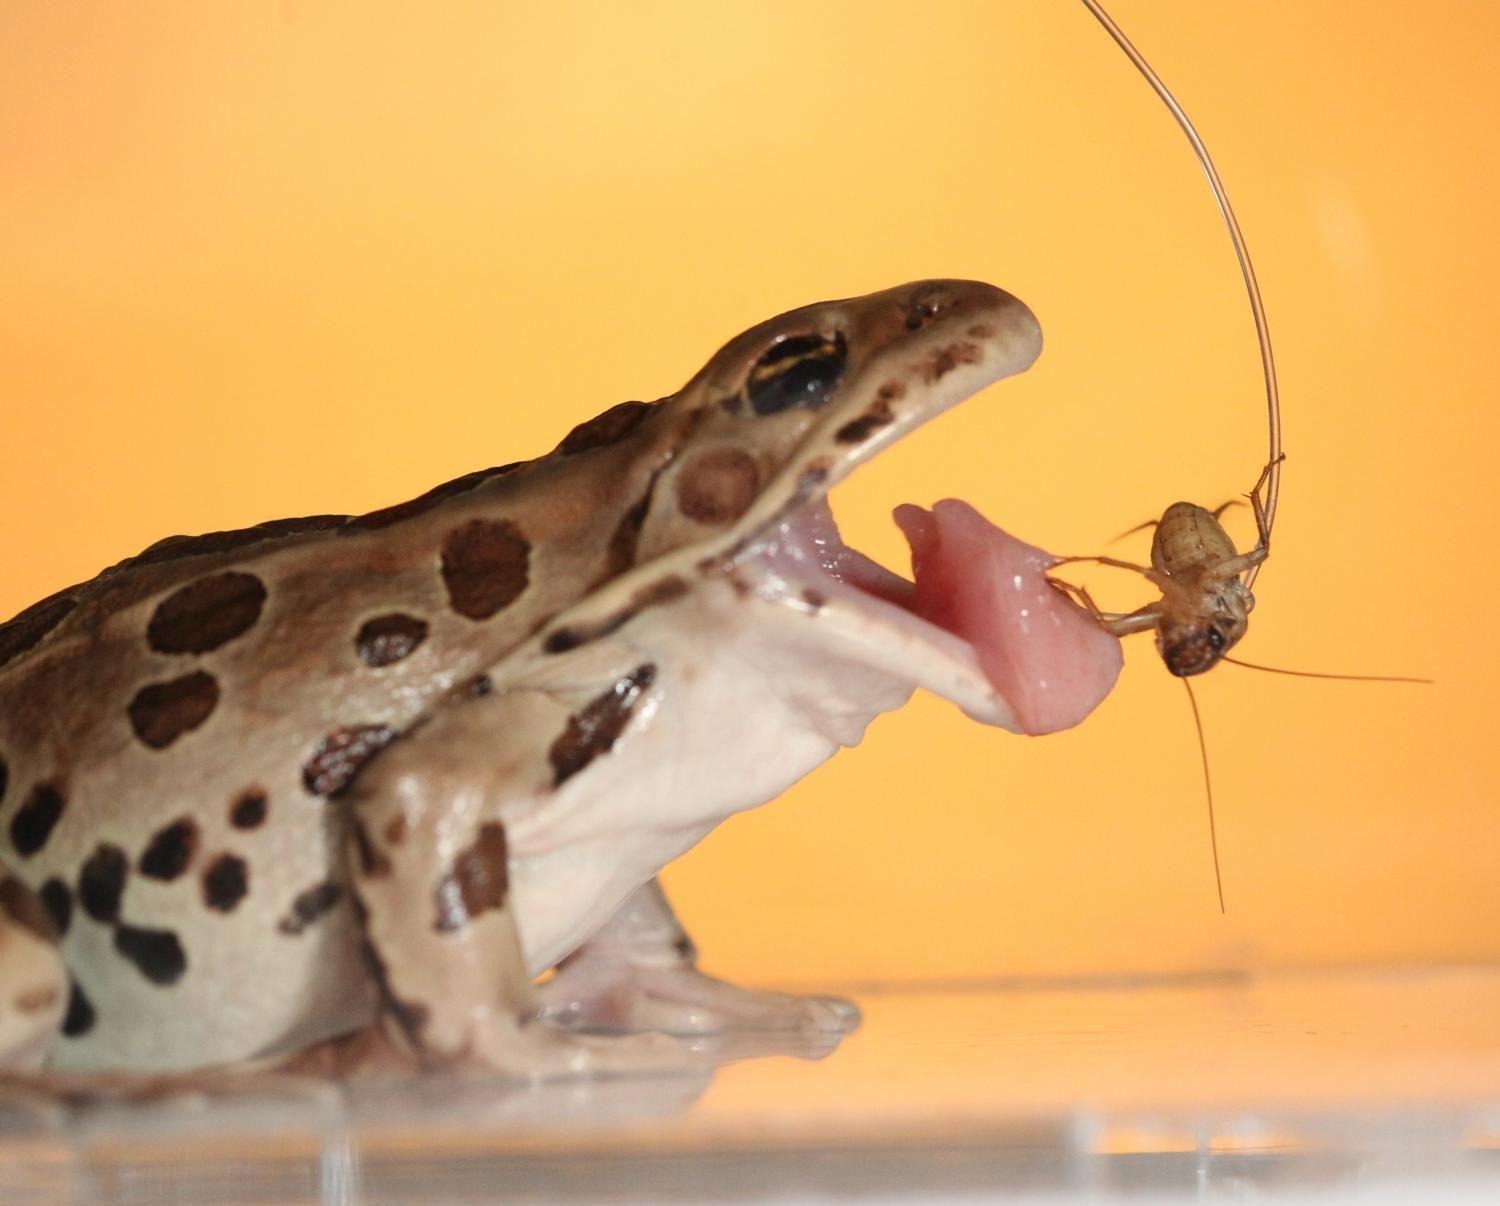 Reversible saliva allows frogs to hang on to next meal